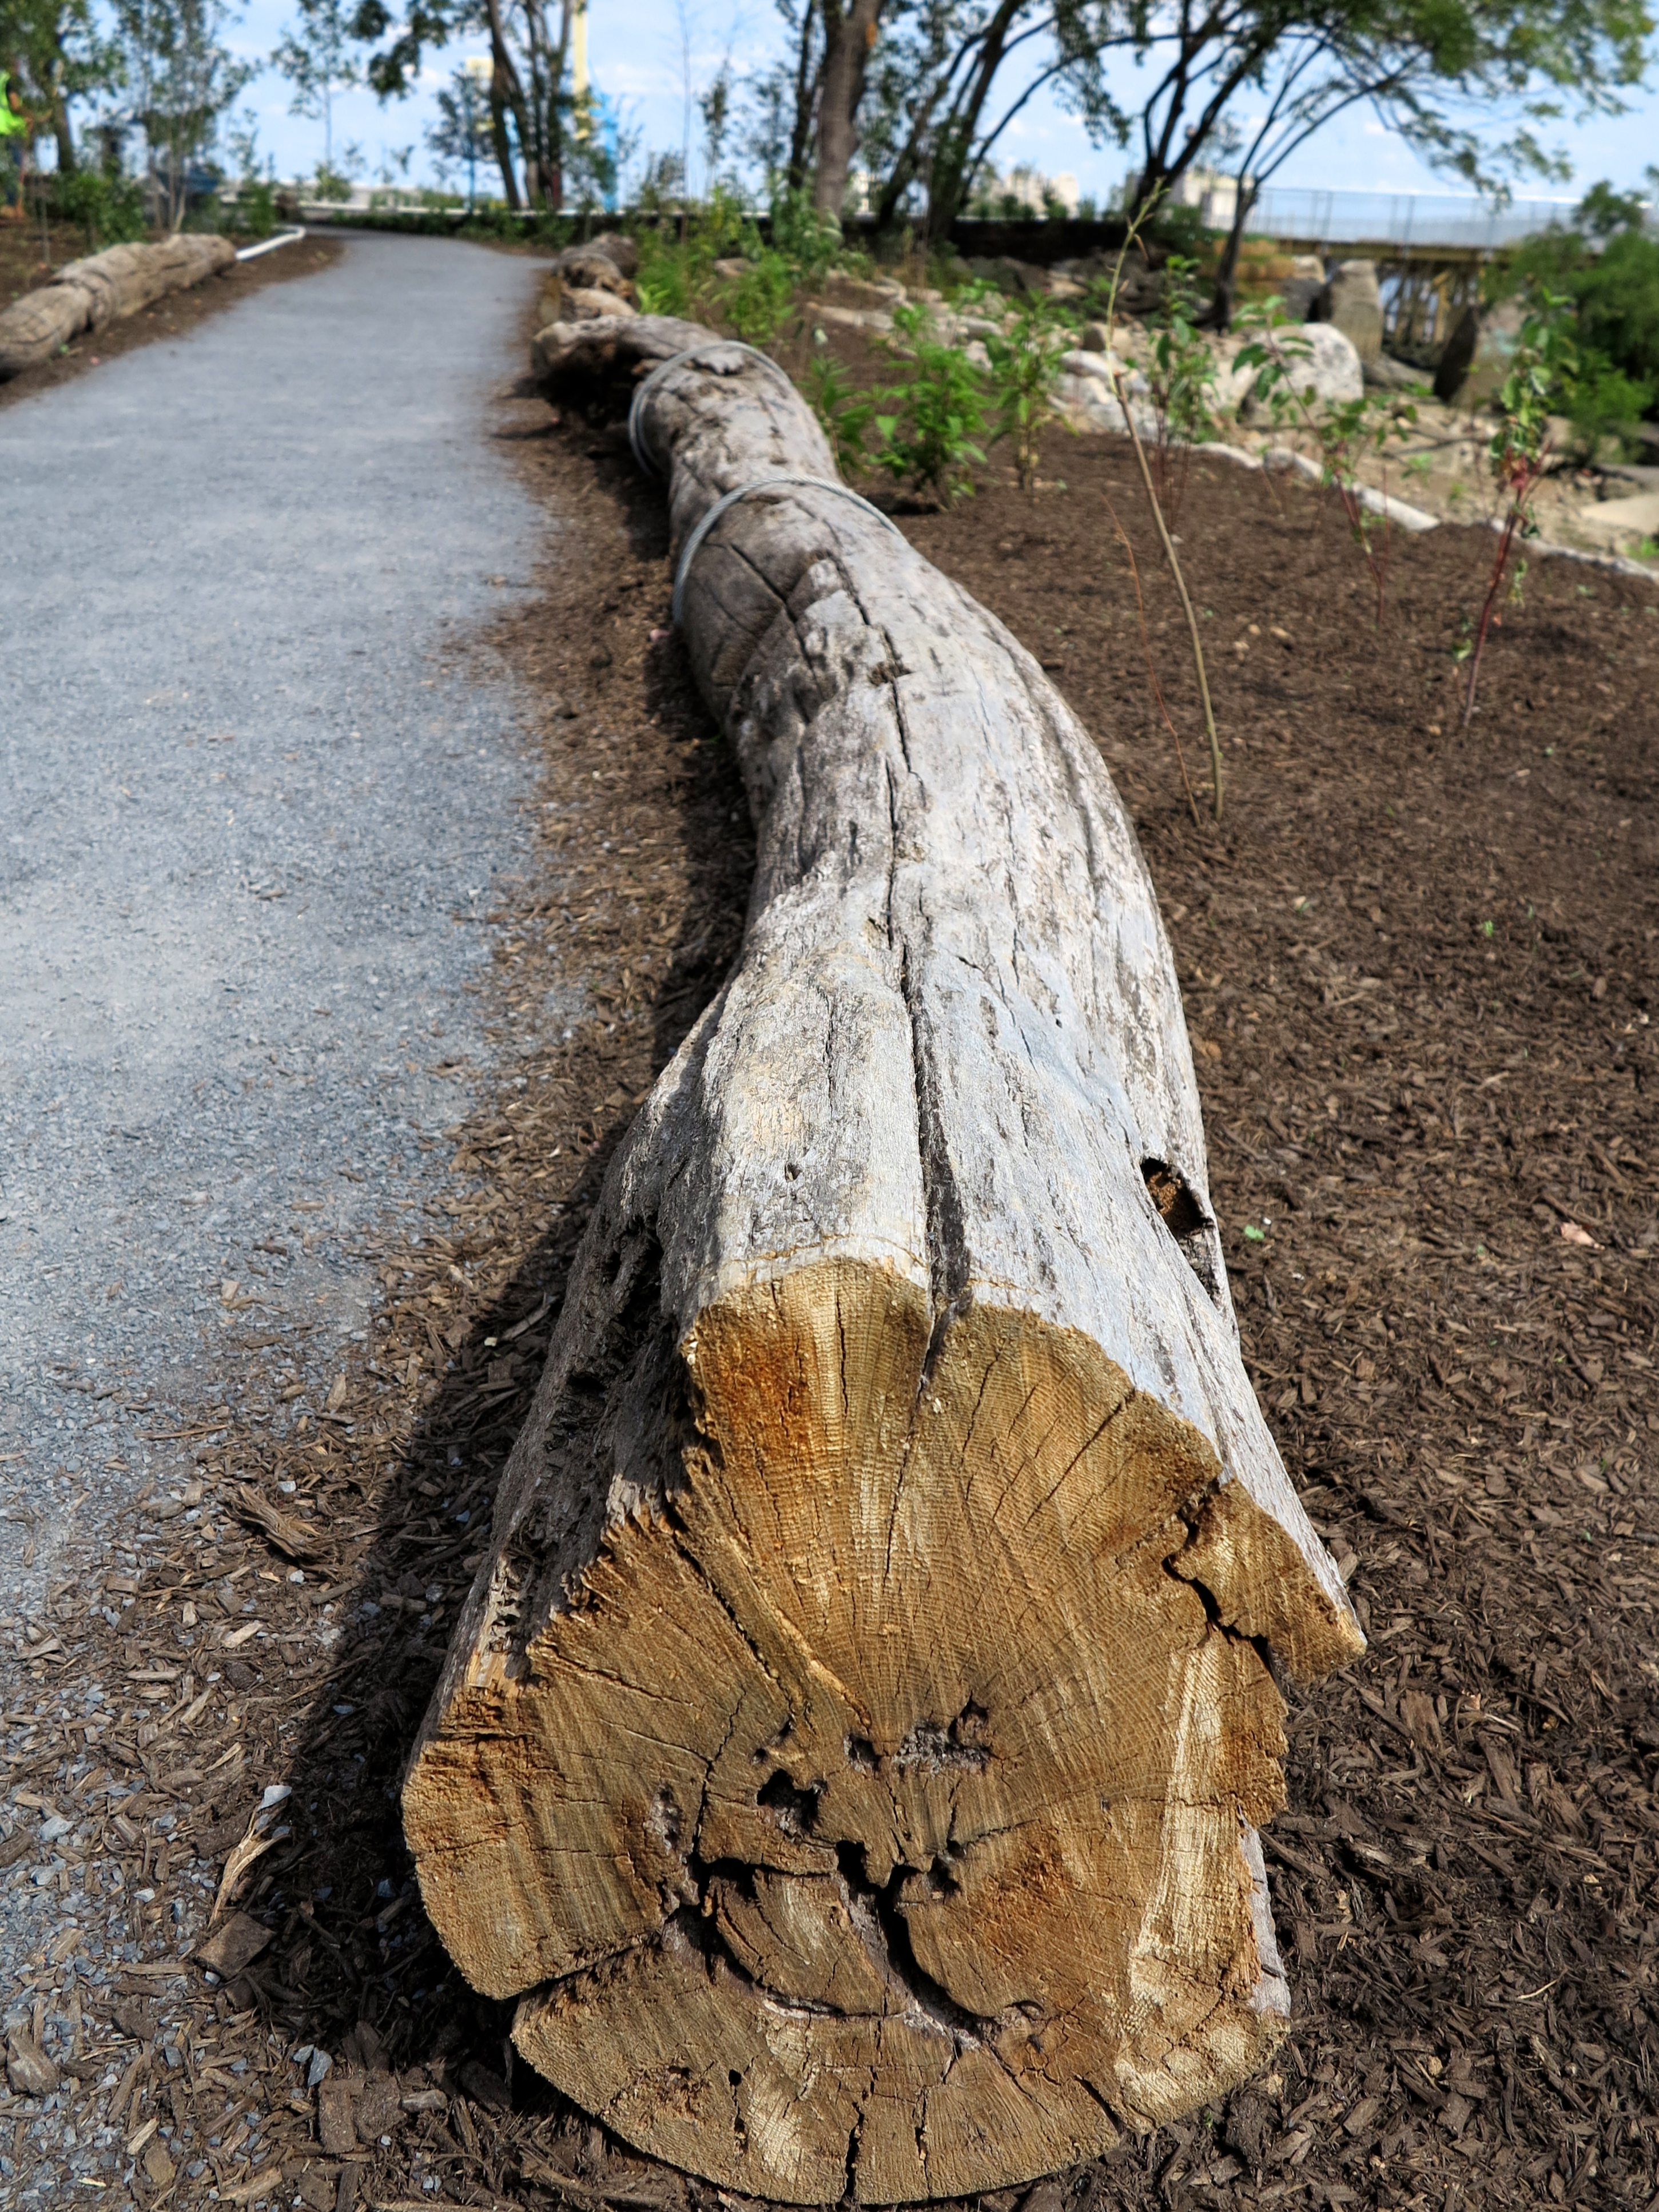 Paths are lined with reclaimed wood and stone